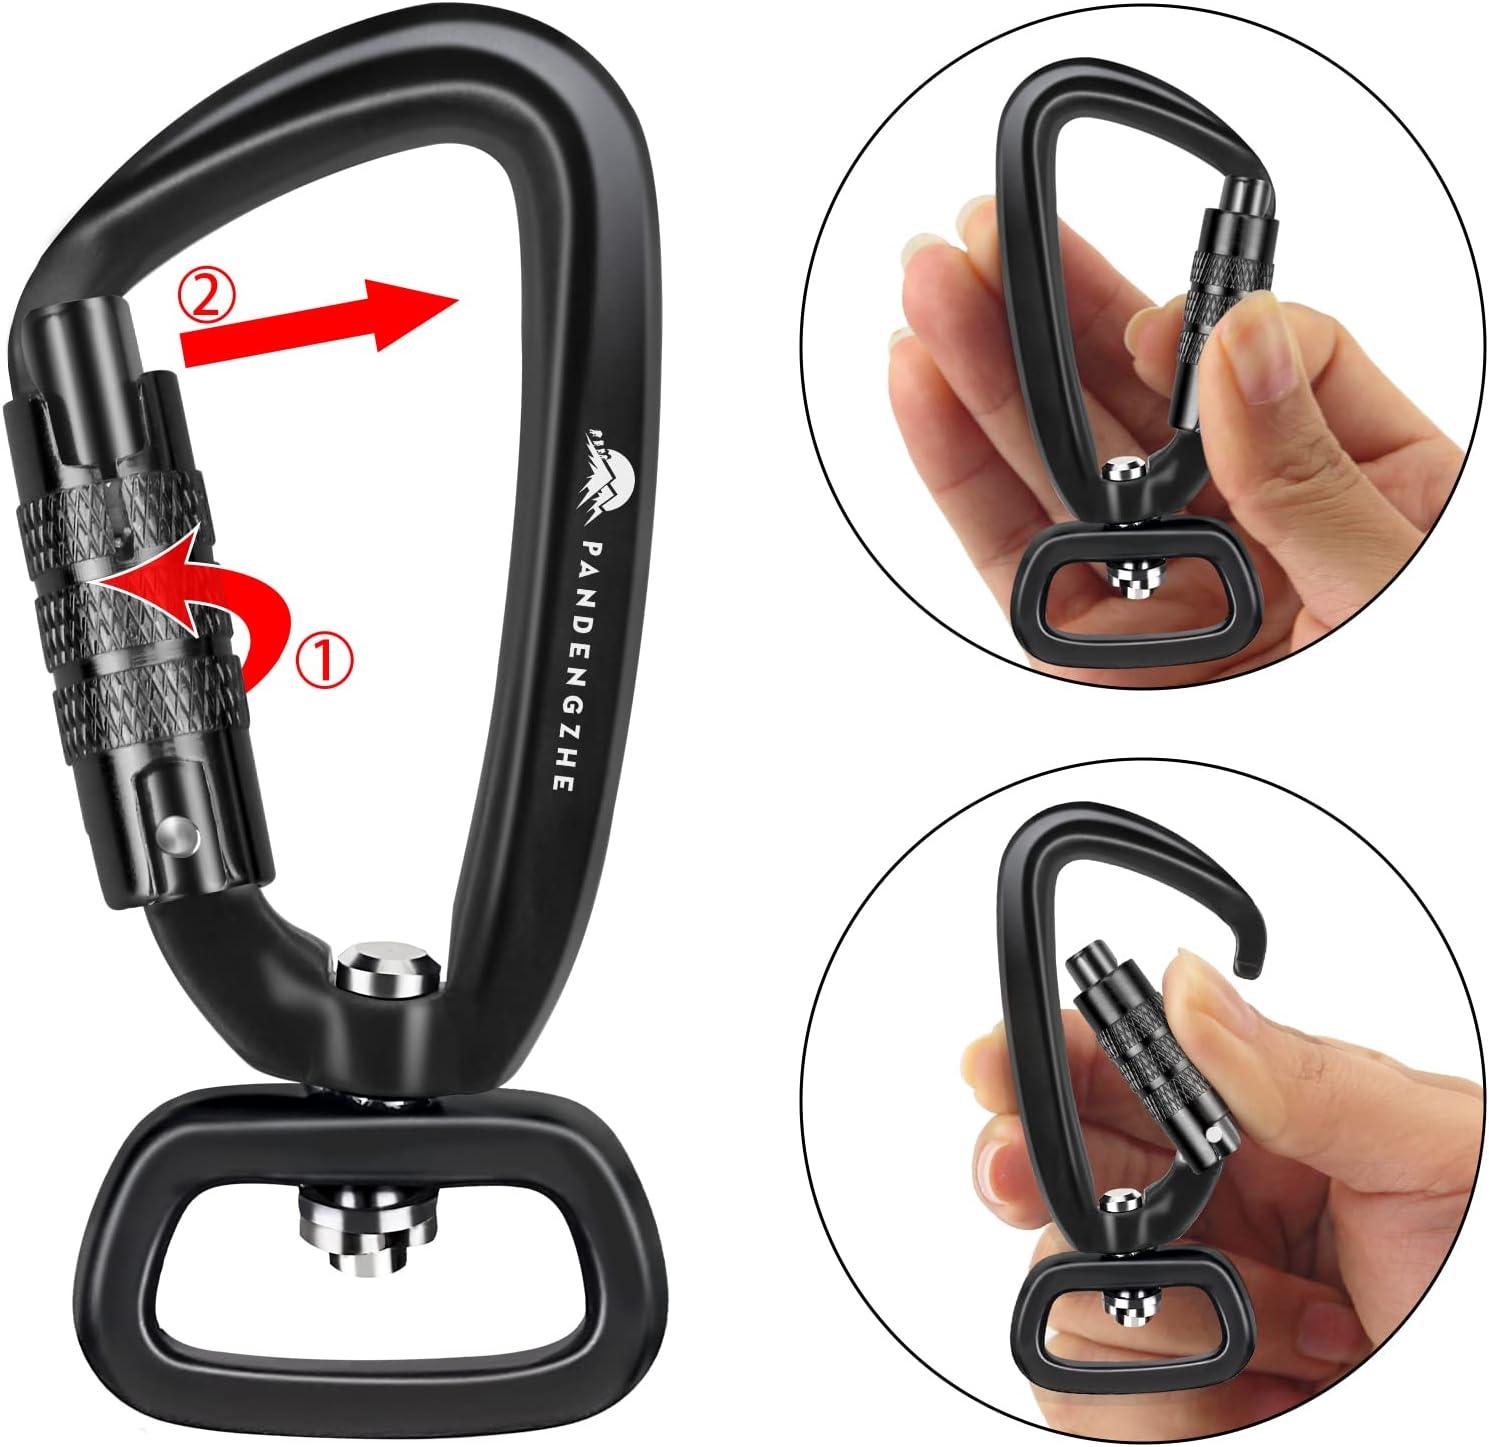 Ideal Locking Carabiner Clips / Small Carabiners for Dog Leash and